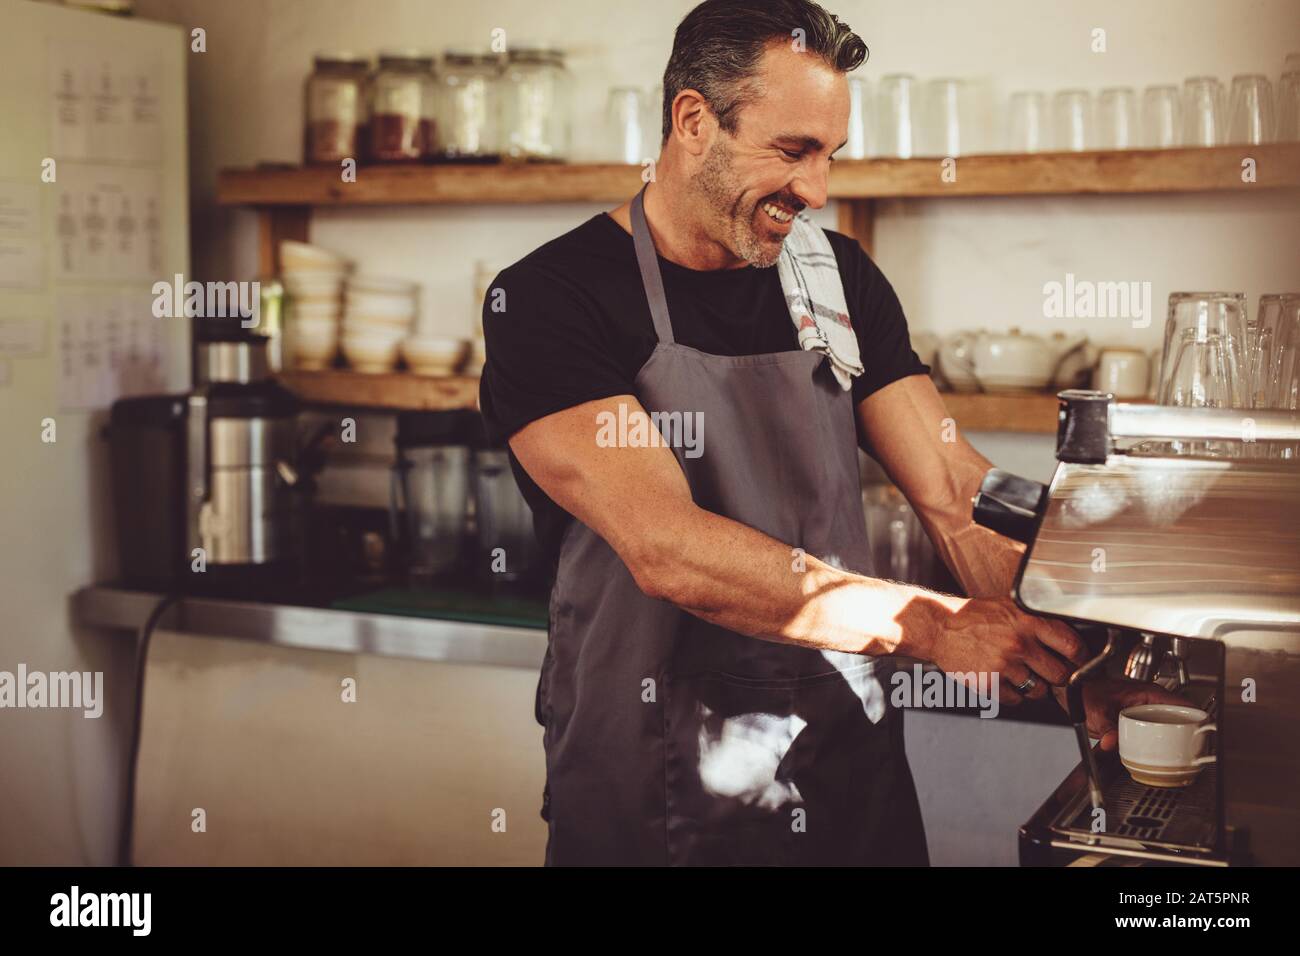 Smiling cafe worker making a cup of coffee with a coffee maker. Male barista working in coffee shop. Stock Photo